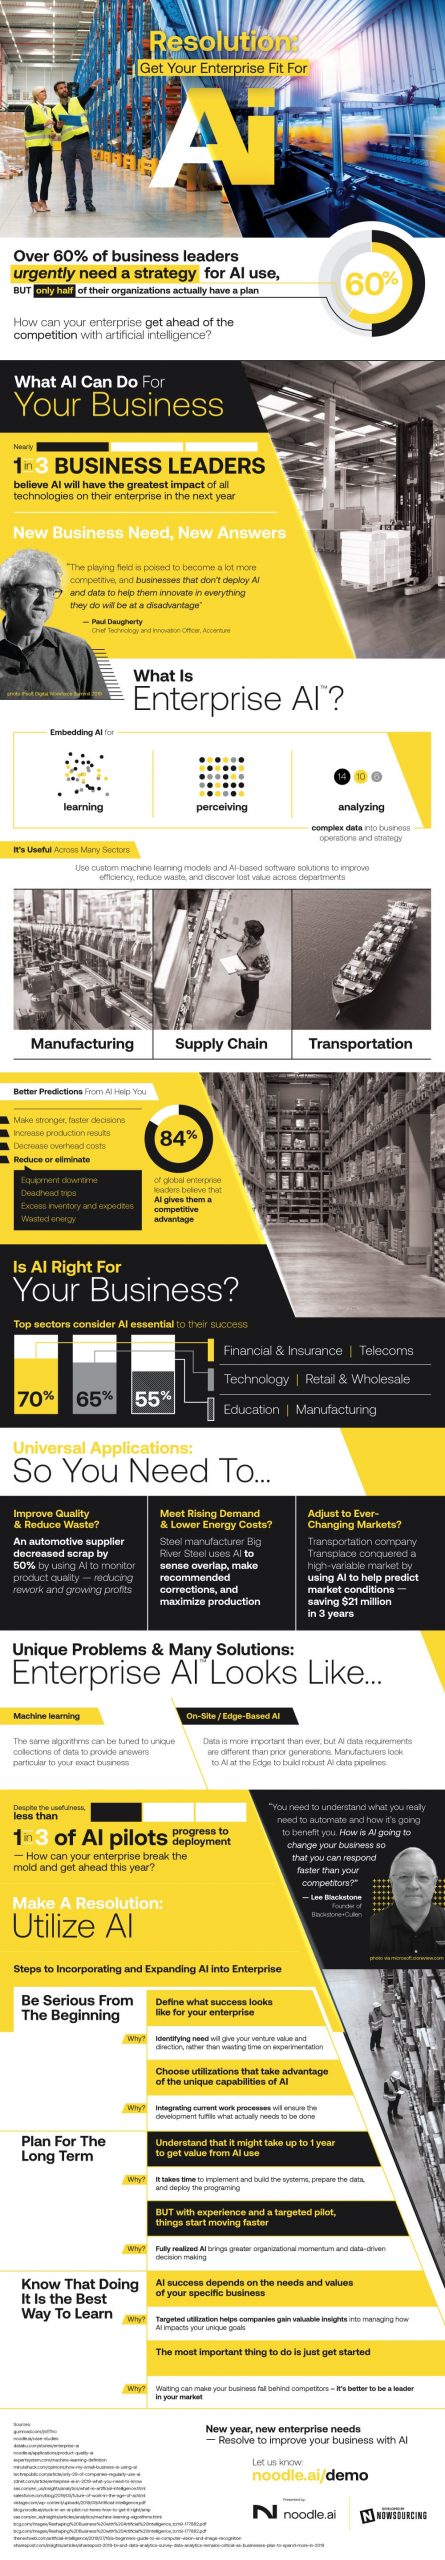 Prepare Your Business to Implement Artificial Intelligence [Infographic]